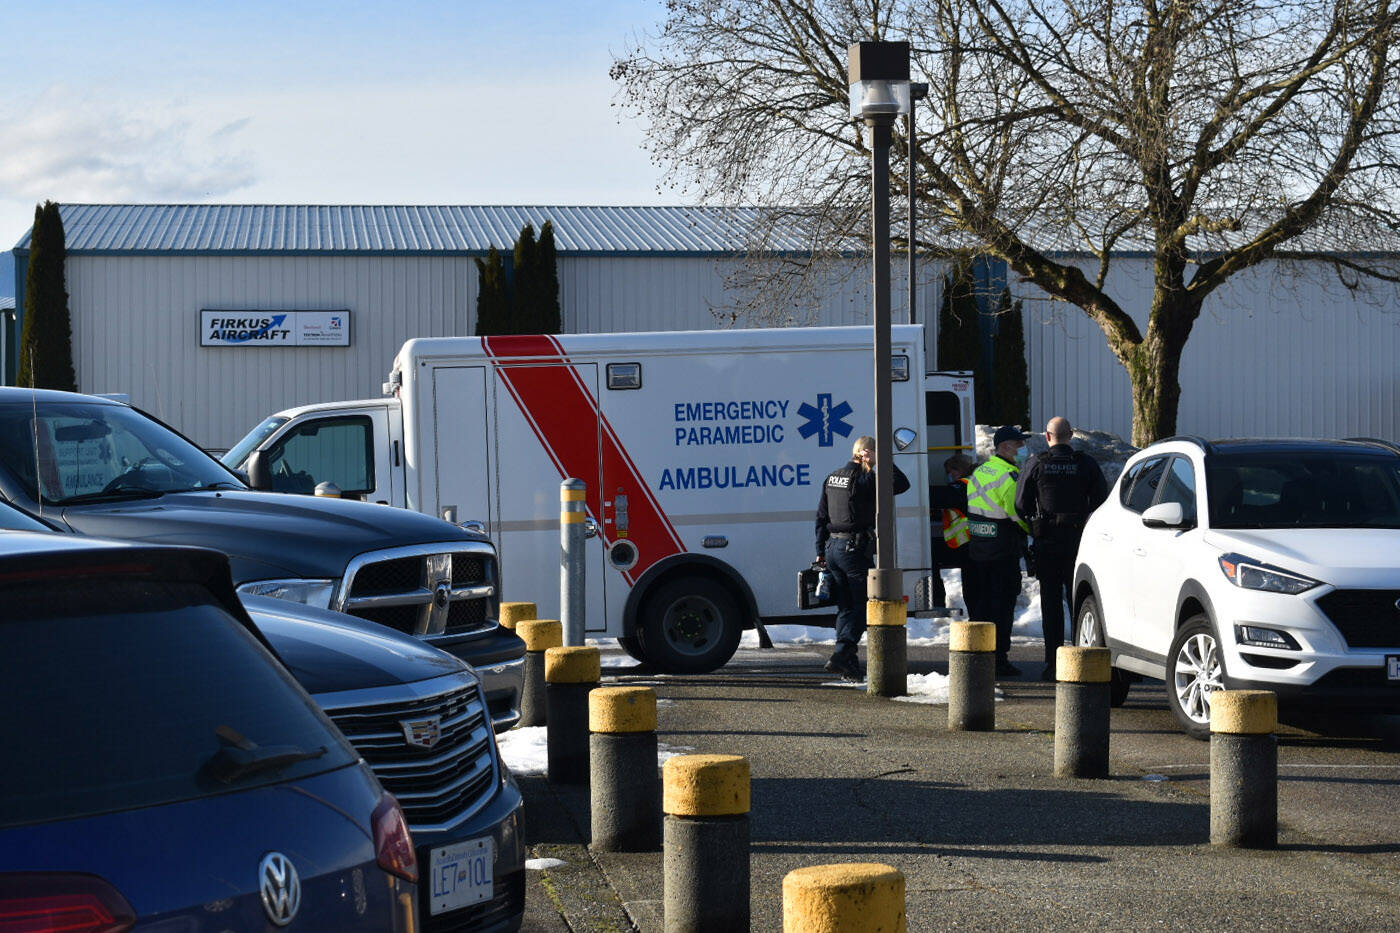 RCMP, paramedics and firefighters were at the scene of a crash on Young Road in Chilliwack where a dump truck went into a ditch on Friday, Jan. 14, 2022. A man suffered a head injury and had to be taken by air ambulance to hospital. Emergency crews are seen here at the Chilliwack Airport. (Mace MacGowan)